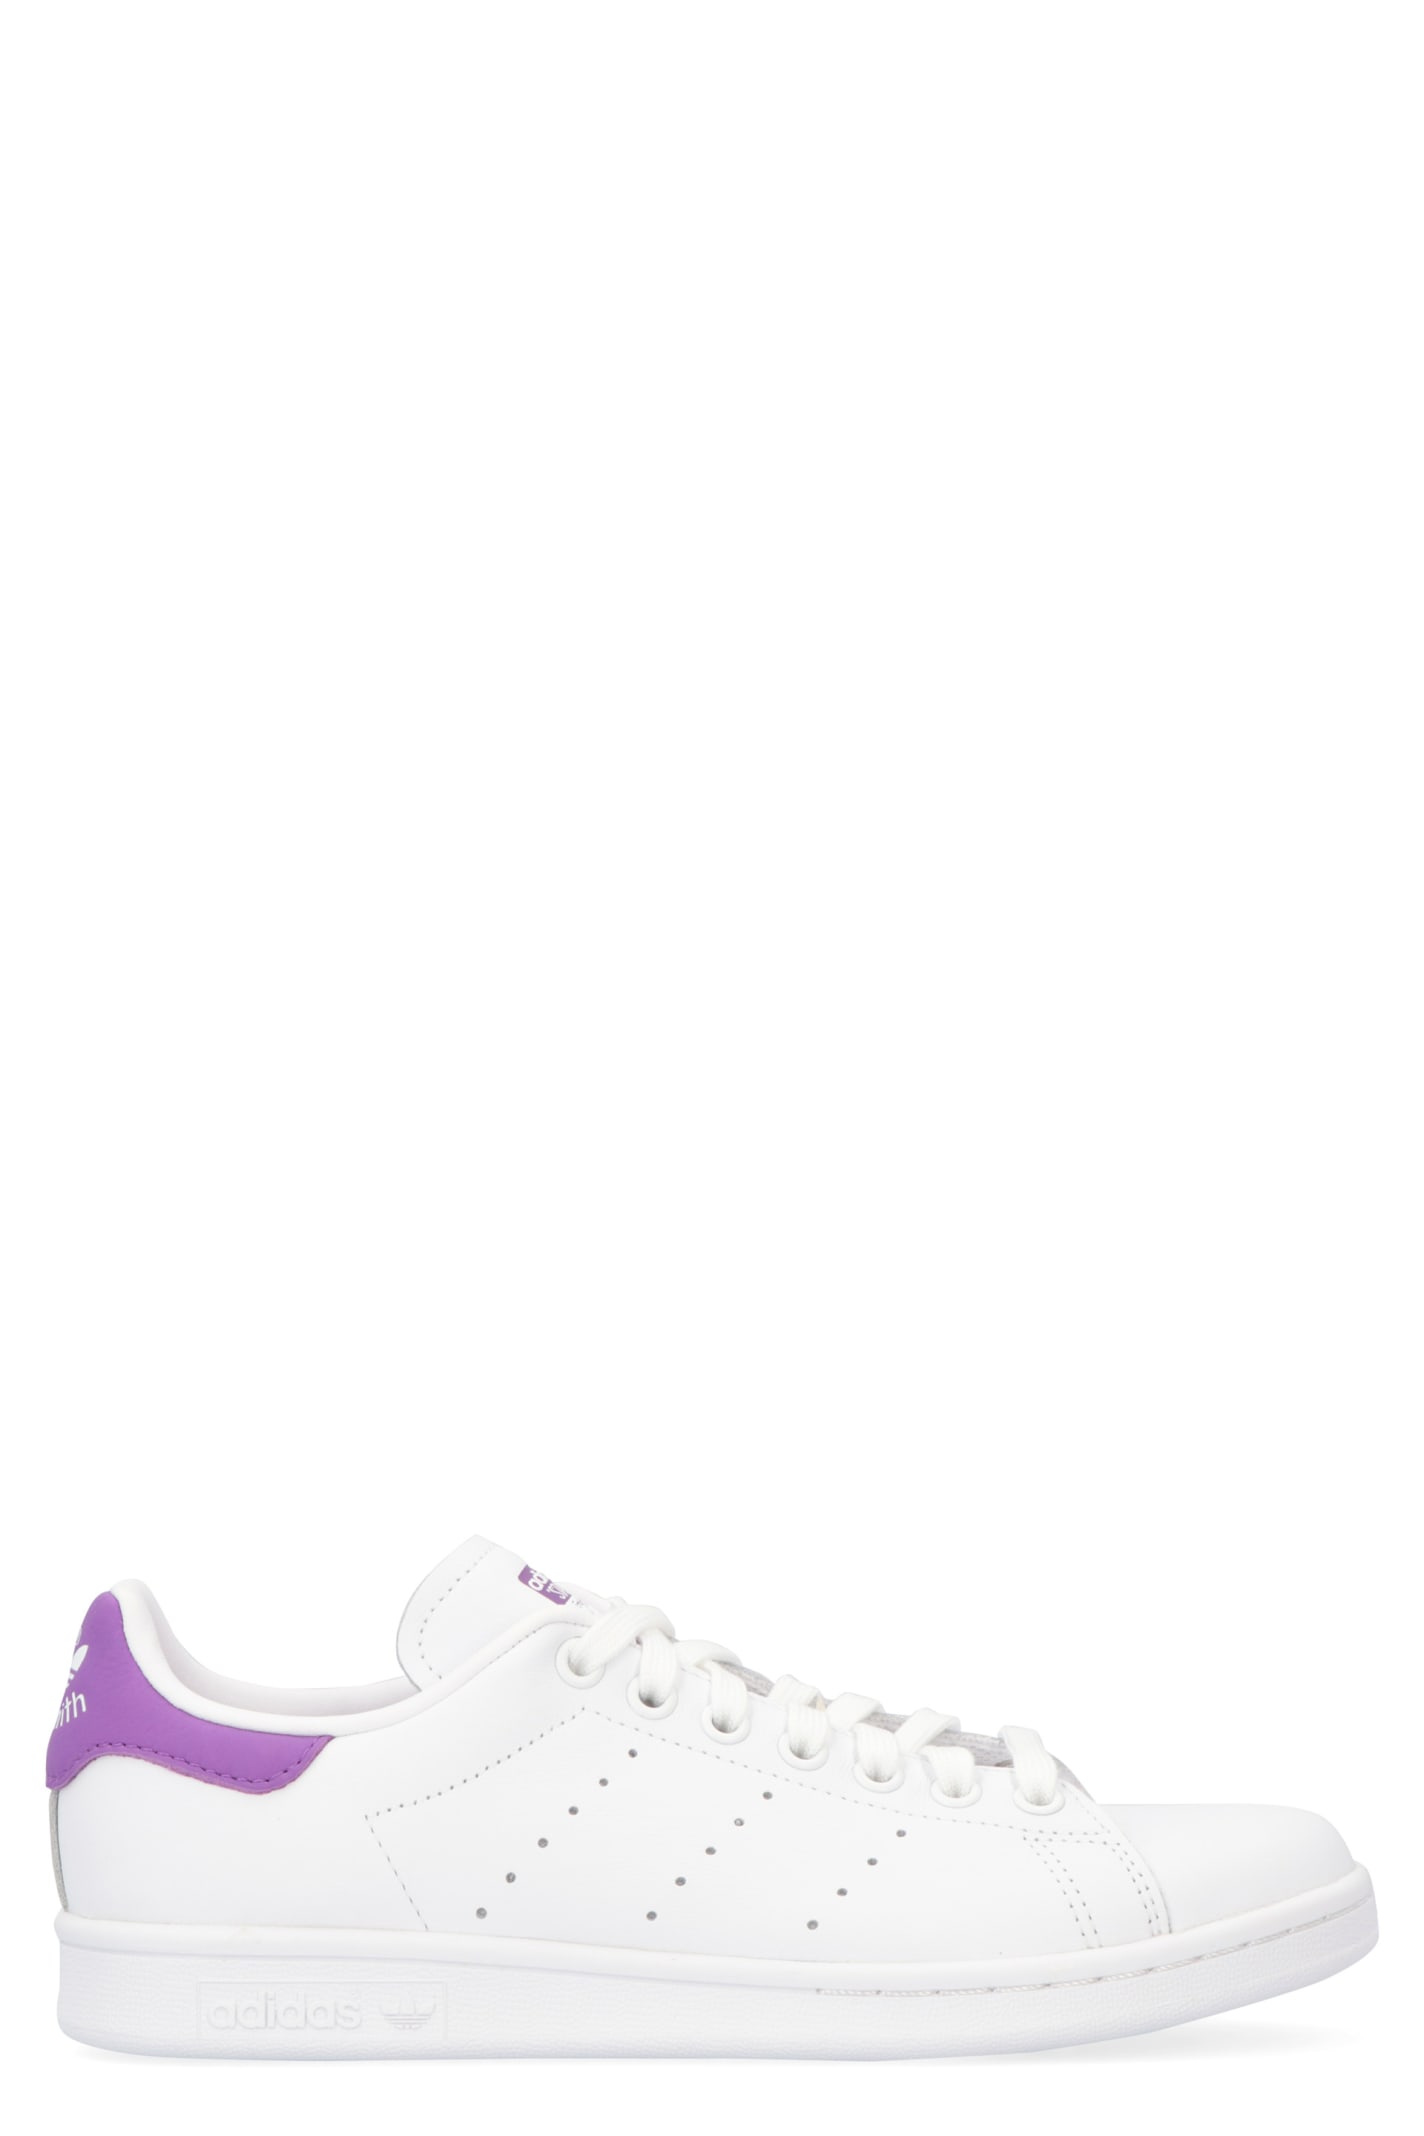 ADIDAS ORIGINALS STAN SMITH LEATHER LOW-TOP SNEAKERS,11298356